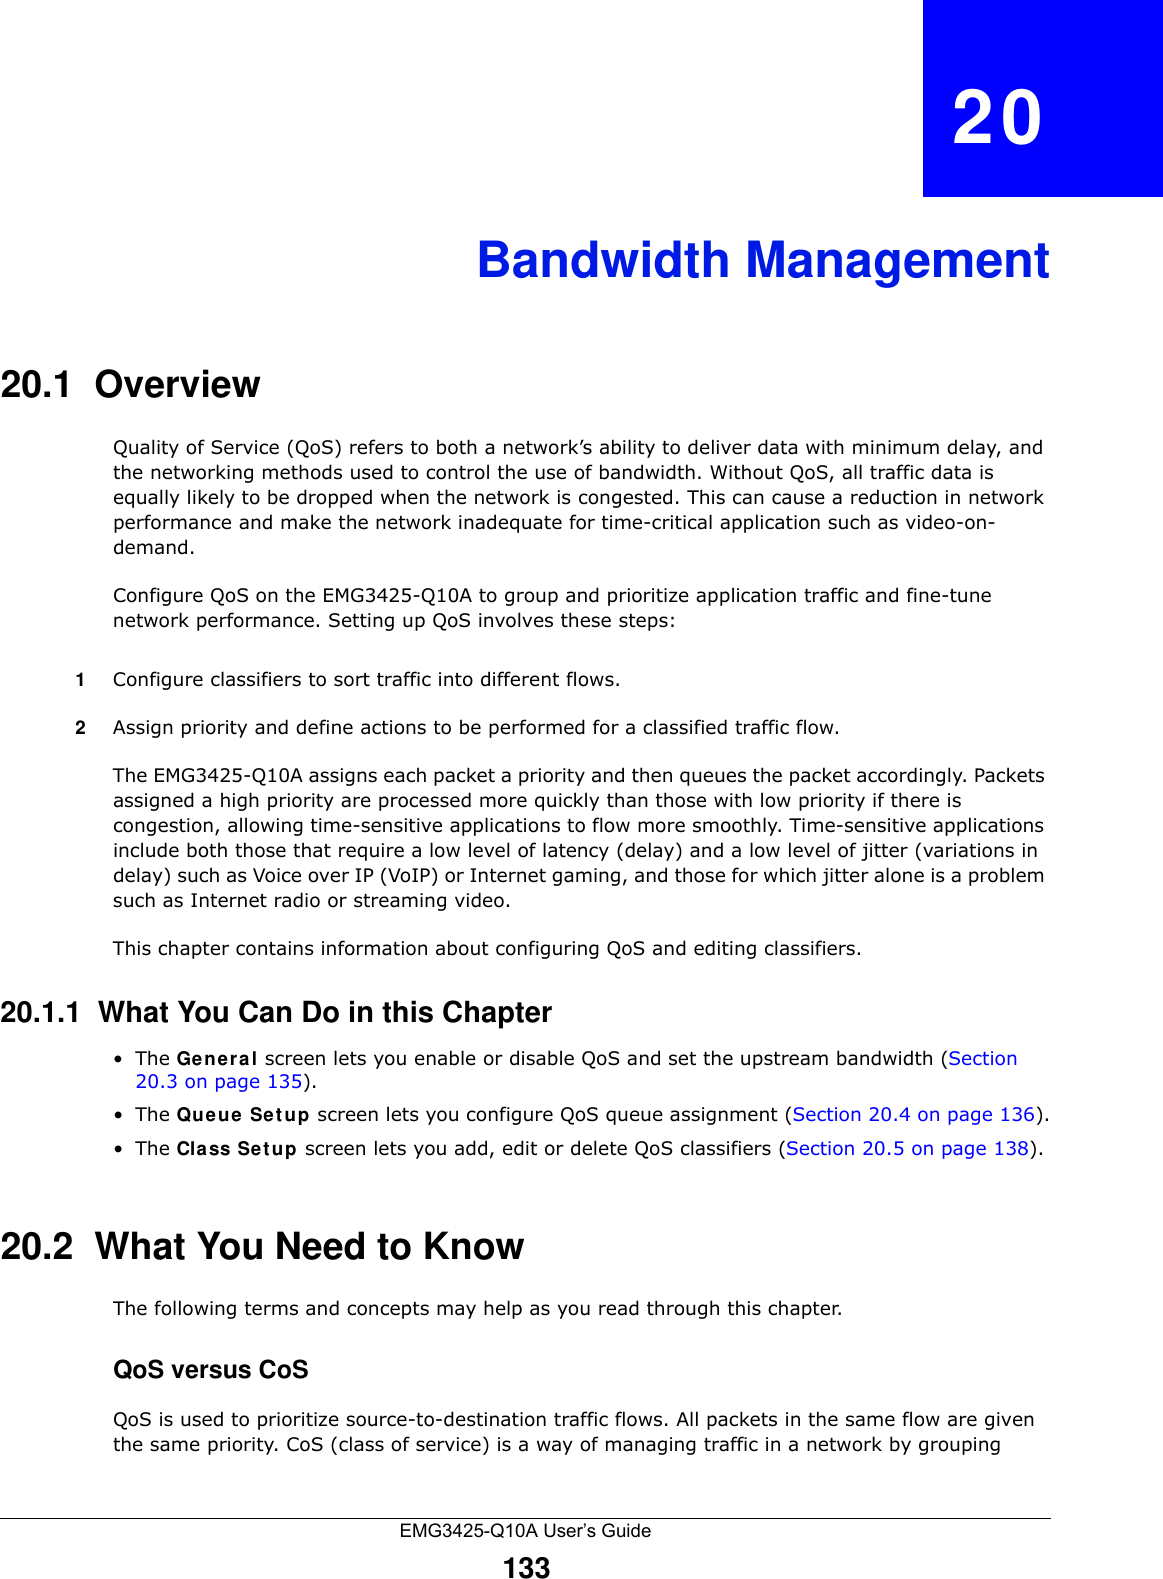 EMG3425-Q10A User’s Guide133CHAPTER   20Bandwidth Management20.1  Overview Quality of Service (QoS) refers to both a network’s ability to deliver data with minimum delay, and the networking methods used to control the use of bandwidth. Without QoS, all traffic data is equally likely to be dropped when the network is congested. This can cause a reduction in network performance and make the network inadequate for time-critical application such as video-on-demand.Configure QoS on the EMG3425-Q10A to group and prioritize application traffic and fine-tune network performance. Setting up QoS involves these steps:1Configure classifiers to sort traffic into different flows. 2Assign priority and define actions to be performed for a classified traffic flow. The EMG3425-Q10A assigns each packet a priority and then queues the packet accordingly. Packets assigned a high priority are processed more quickly than those with low priority if there is congestion, allowing time-sensitive applications to flow more smoothly. Time-sensitive applications include both those that require a low level of latency (delay) and a low level of jitter (variations in delay) such as Voice over IP (VoIP) or Internet gaming, and those for which jitter alone is a problem such as Internet radio or streaming video.This chapter contains information about configuring QoS and editing classifiers.20.1.1  What You Can Do in this Chapter•The Ge nera l screen lets you enable or disable QoS and set the upstream bandwidth (Section 20.3 on page 135).•The Queue Se t up screen lets you configure QoS queue assignment (Section 20.4 on page 136).•The Cla ss Se t u p screen lets you add, edit or delete QoS classifiers (Section 20.5 on page 138).20.2  What You Need to KnowThe following terms and concepts may help as you read through this chapter.QoS versus CoSQoS is used to prioritize source-to-destination traffic flows. All packets in the same flow are given the same priority. CoS (class of service) is a way of managing traffic in a network by grouping 